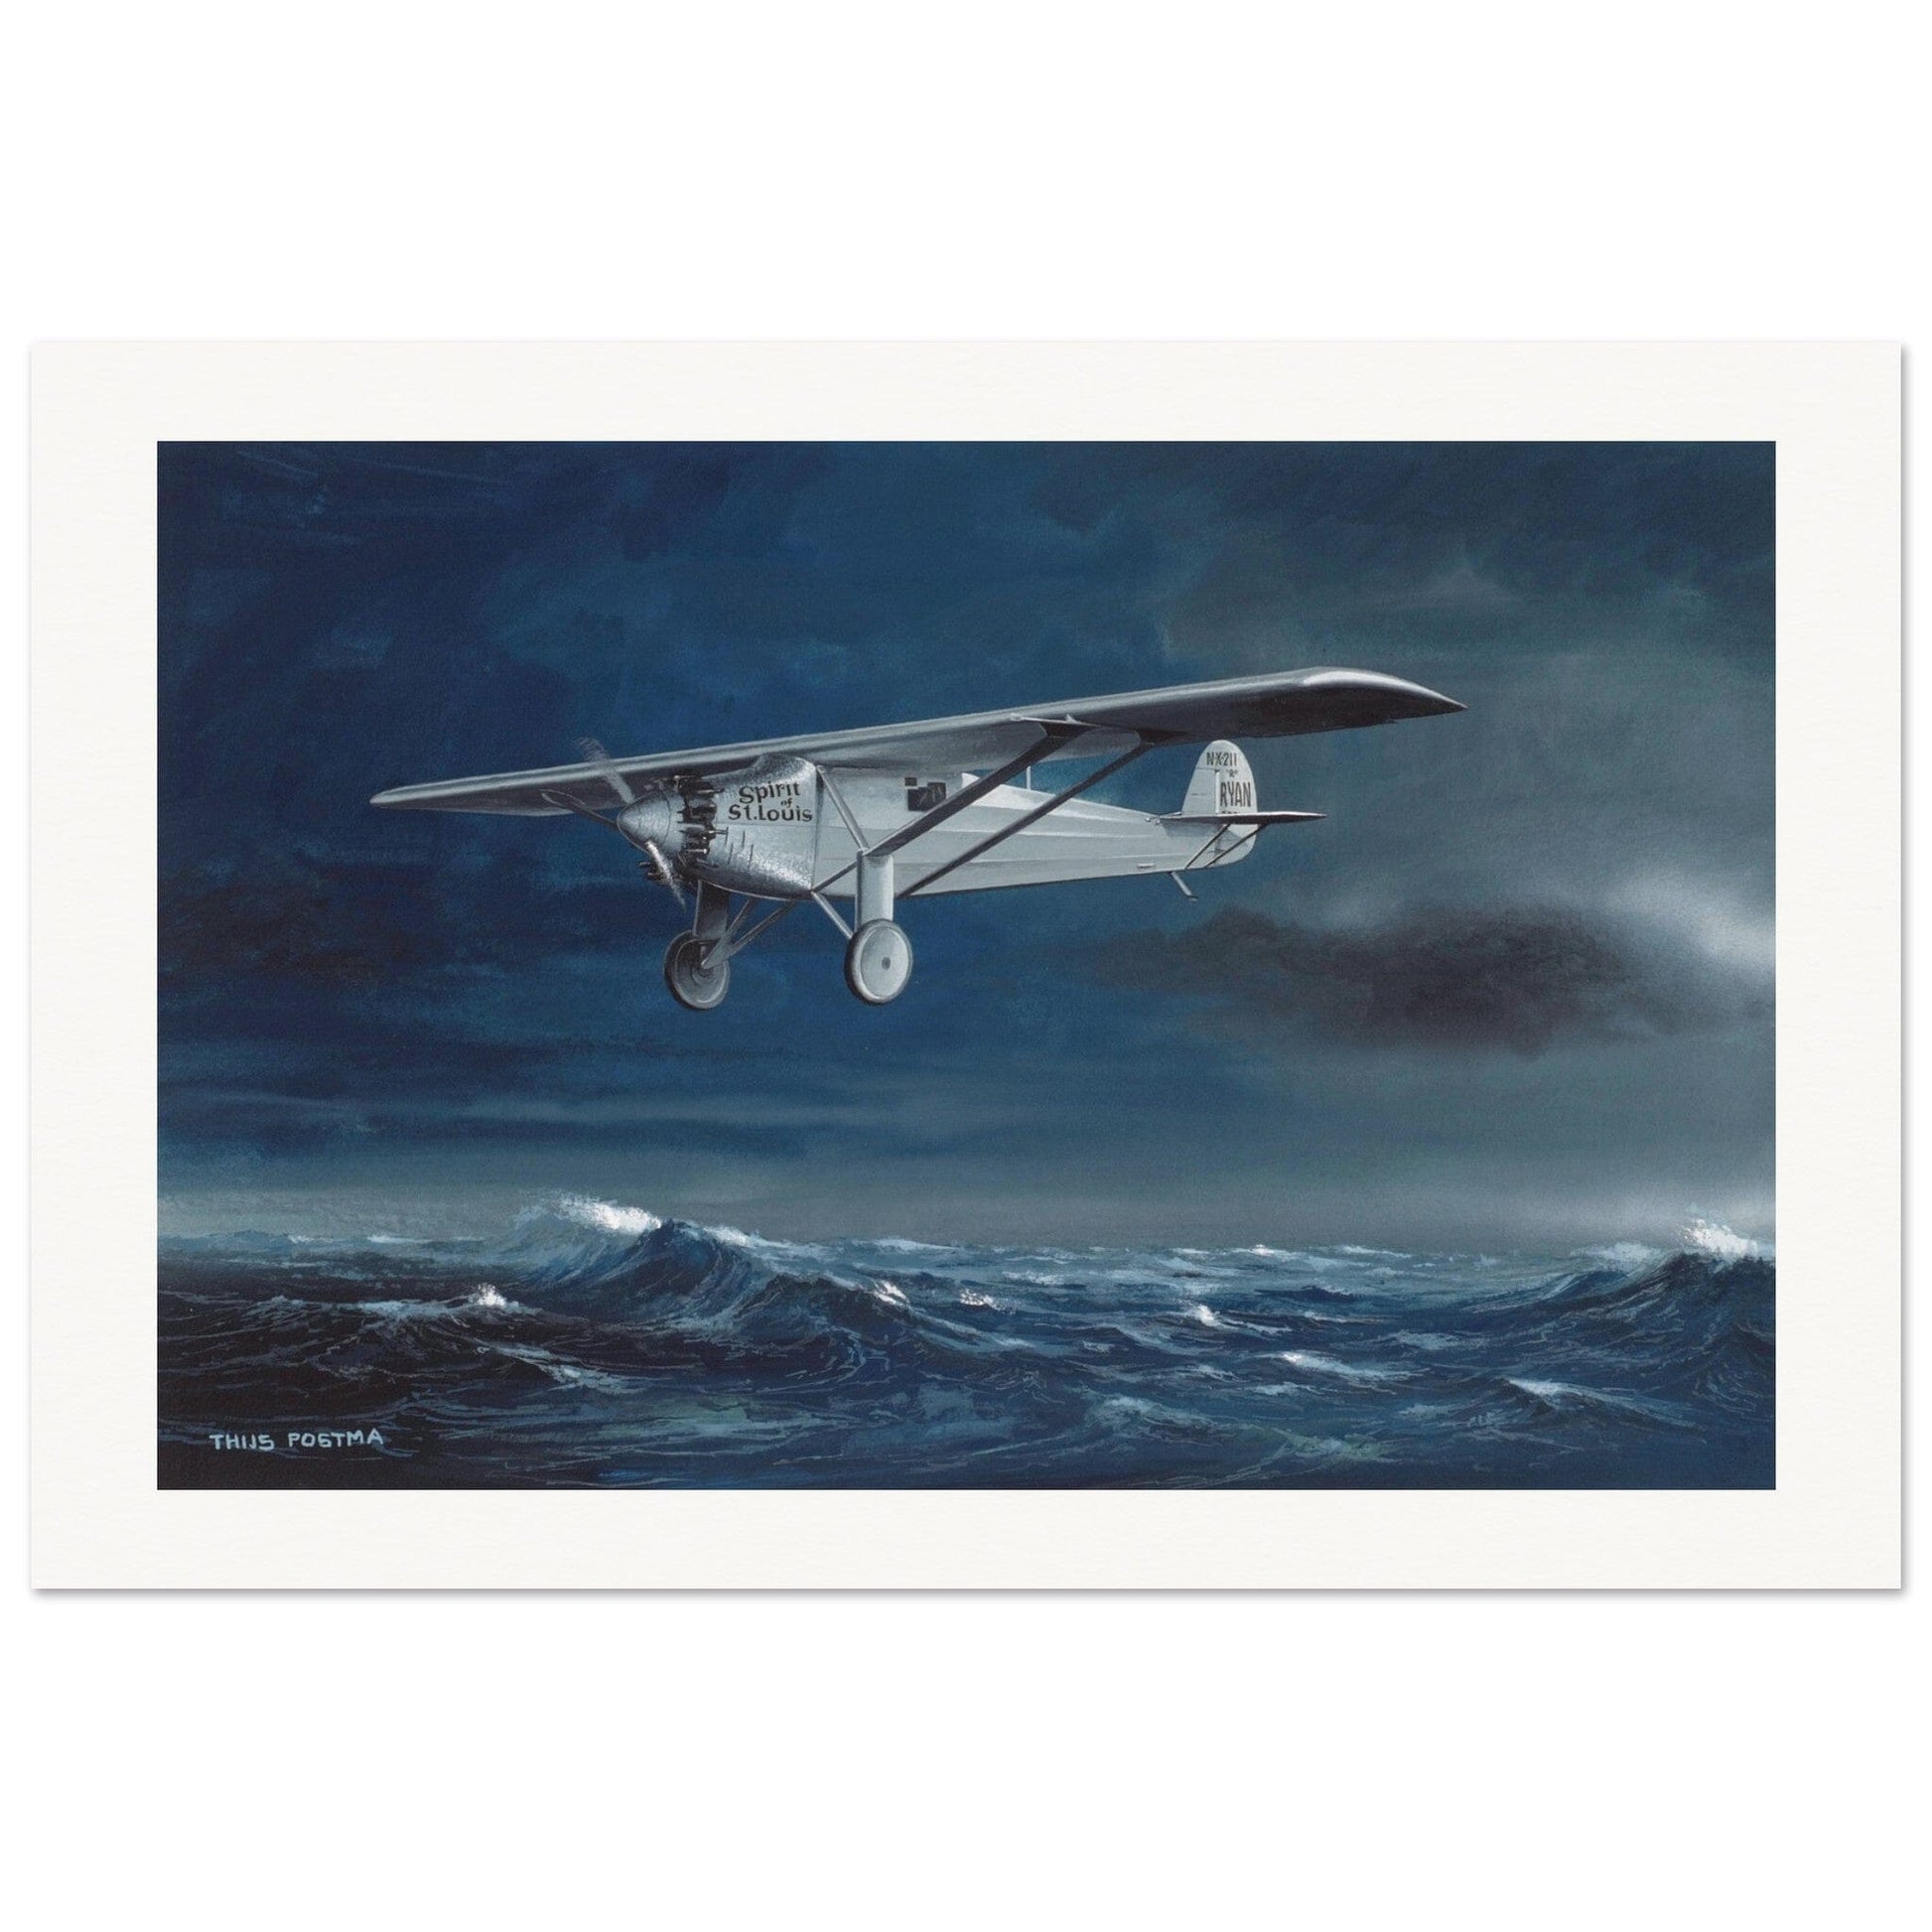 Thijs Postma - Poster - Charles Lindbergh Spirit of St. Louis 1927 Poster Only TP Aviation Art 60x90 cm / 24x36″ 